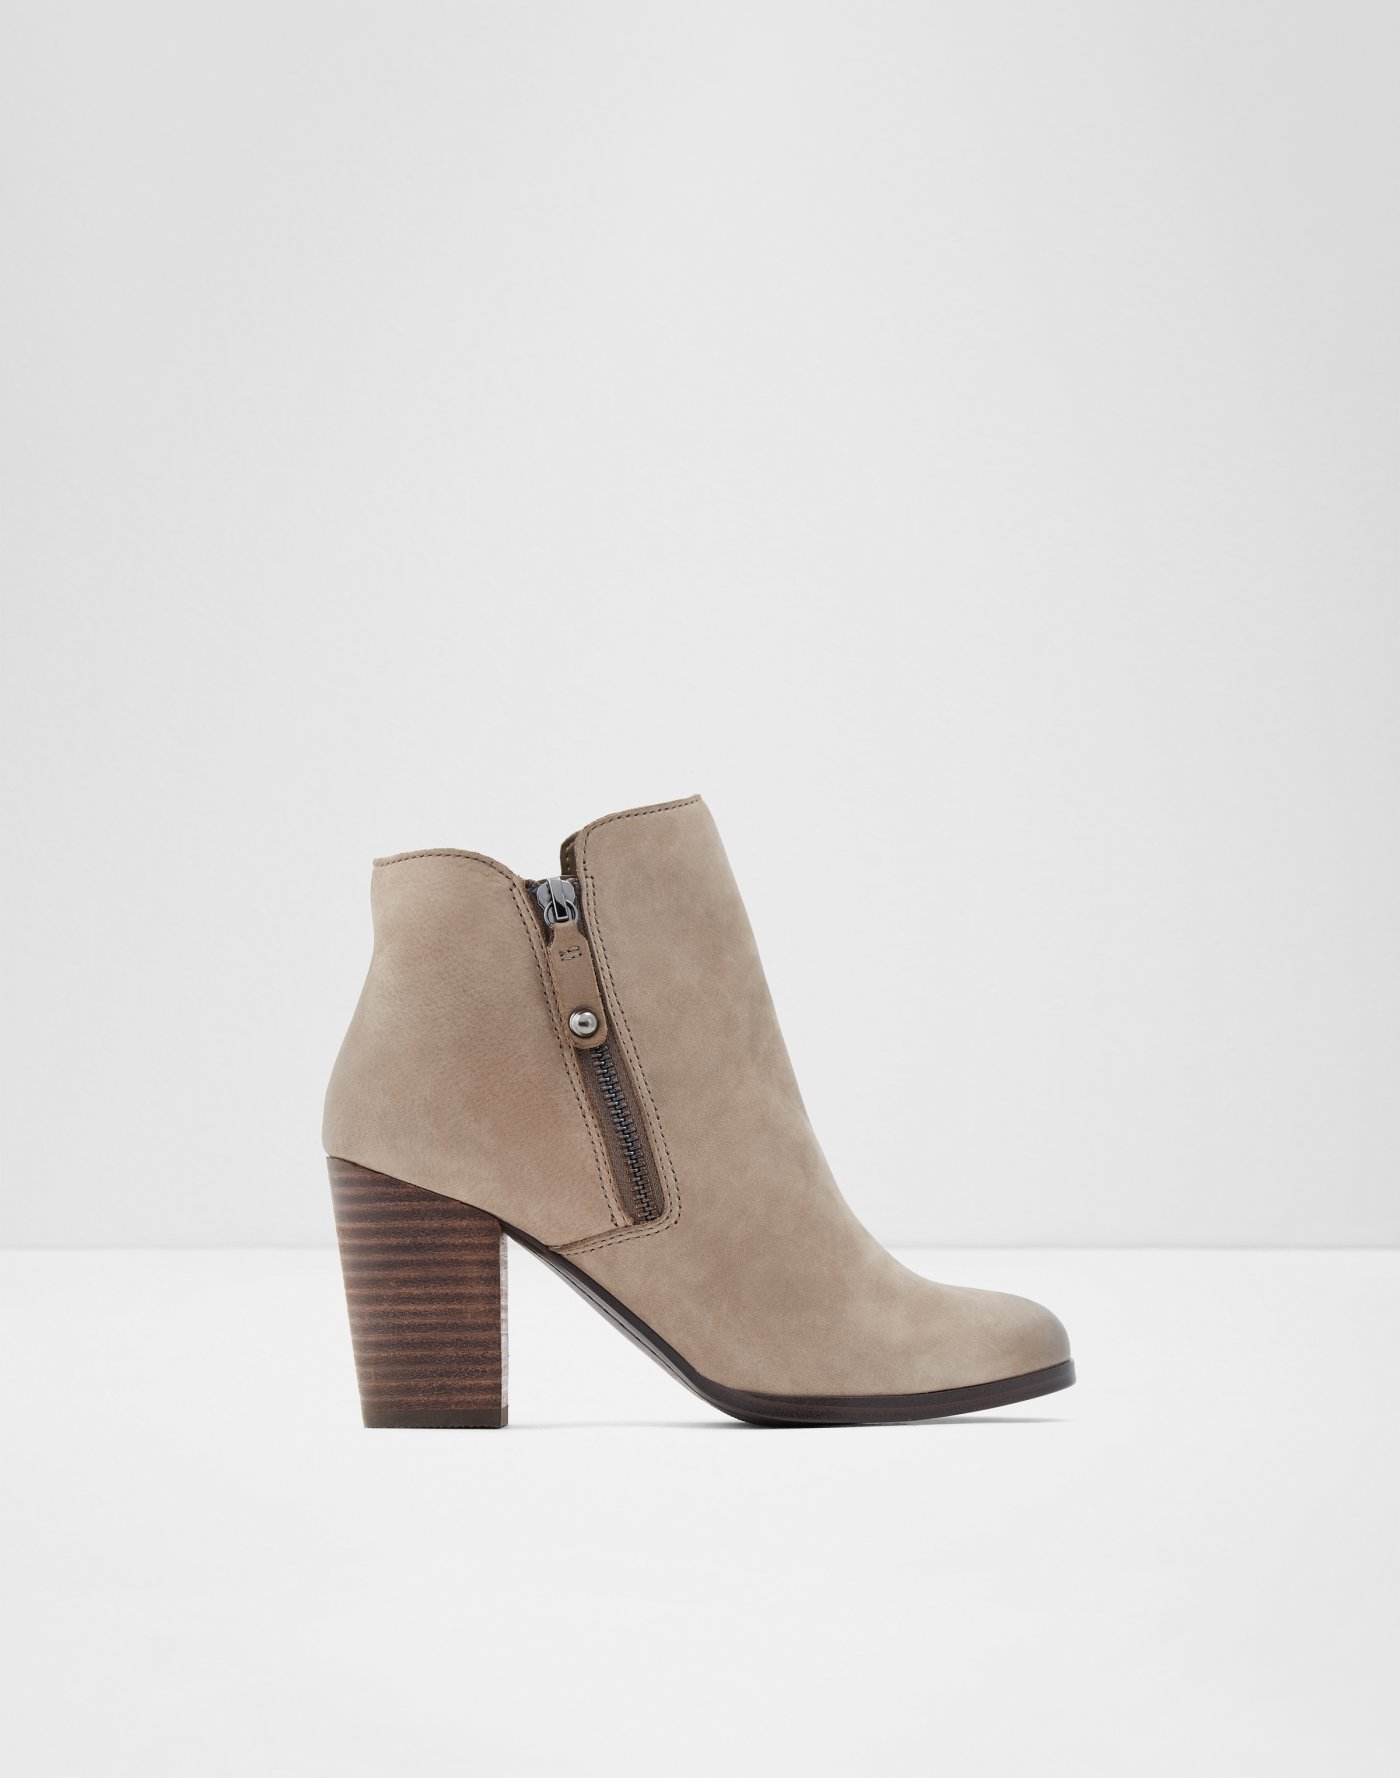 Women's Boots: Winter Boots, Ankle Boots, Waterproof Boots | ALDO US